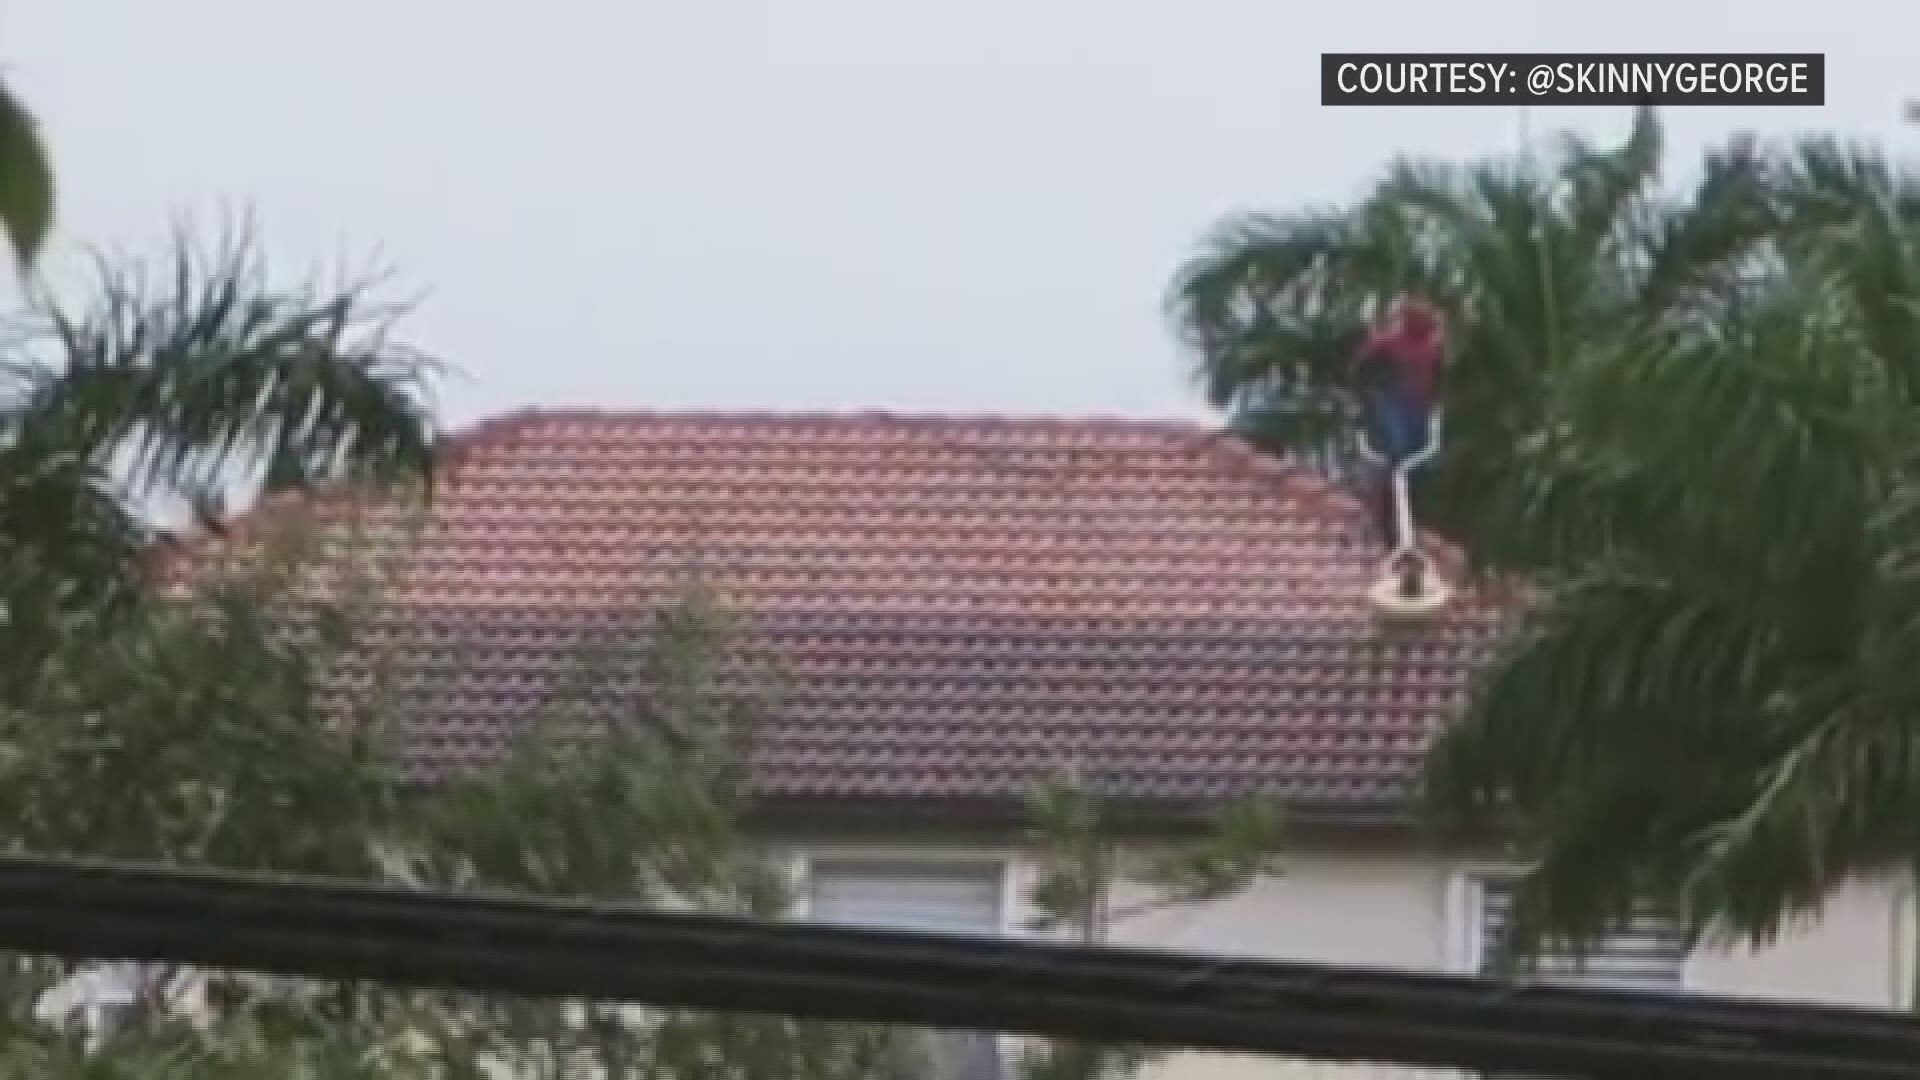 George Martinez looked out his window, safe and sound from the rolling thunderstorm outside, and couldn't believe what he was seeing.

But what he saw only could happen in Florida: Spider-Man power washing a roof. He posted the hilarious scene to Instagram, much to his followers' delight.